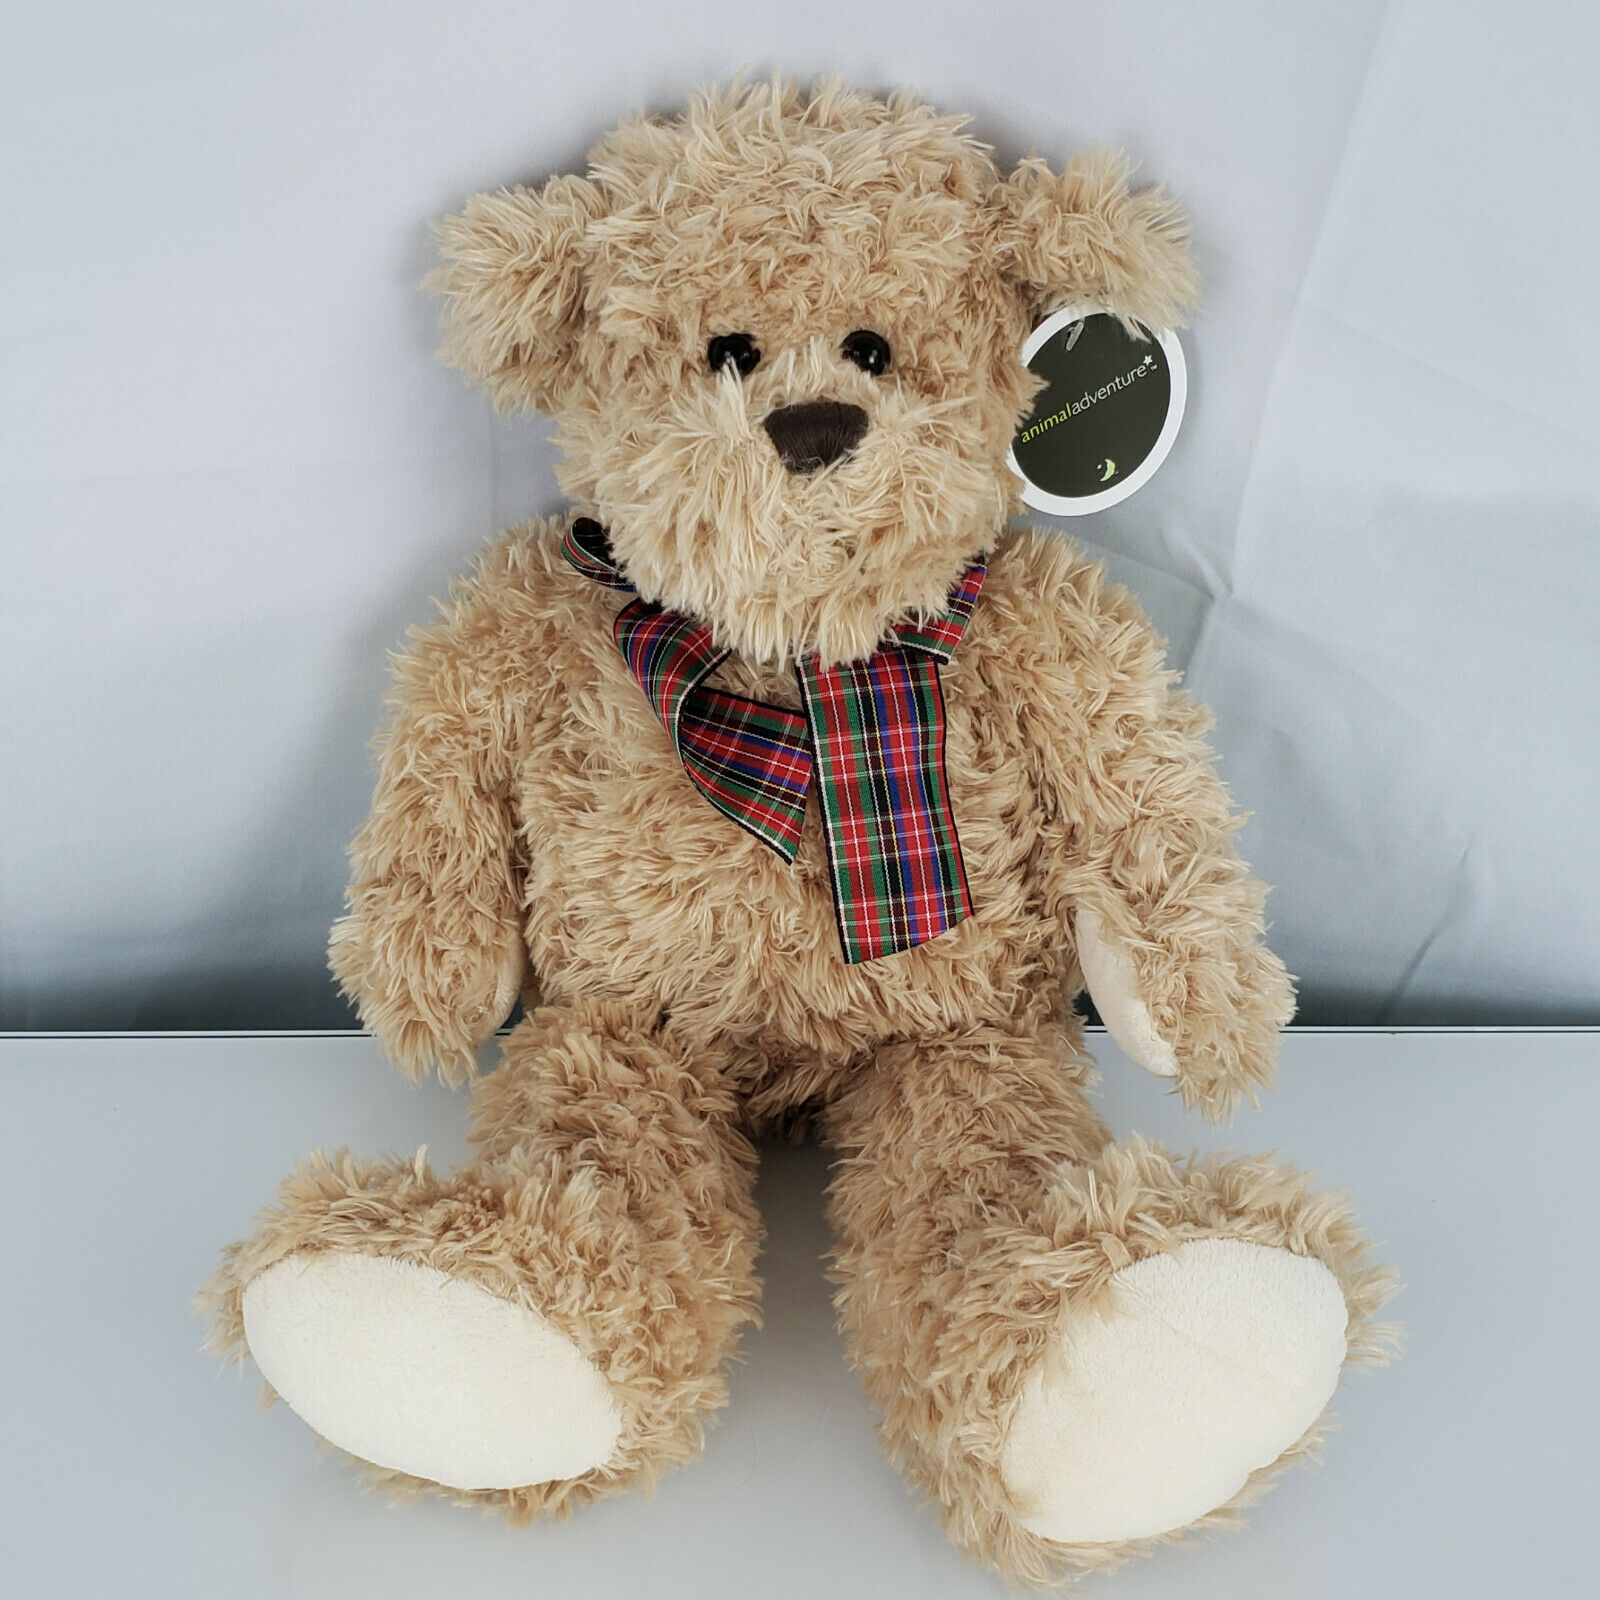 Primary image for ANIMAL ADVENTURE 20" BROWN BEIGE TAN TEDDY BEAR PLUSH PLAID BOW 2006 STUFFED TOY